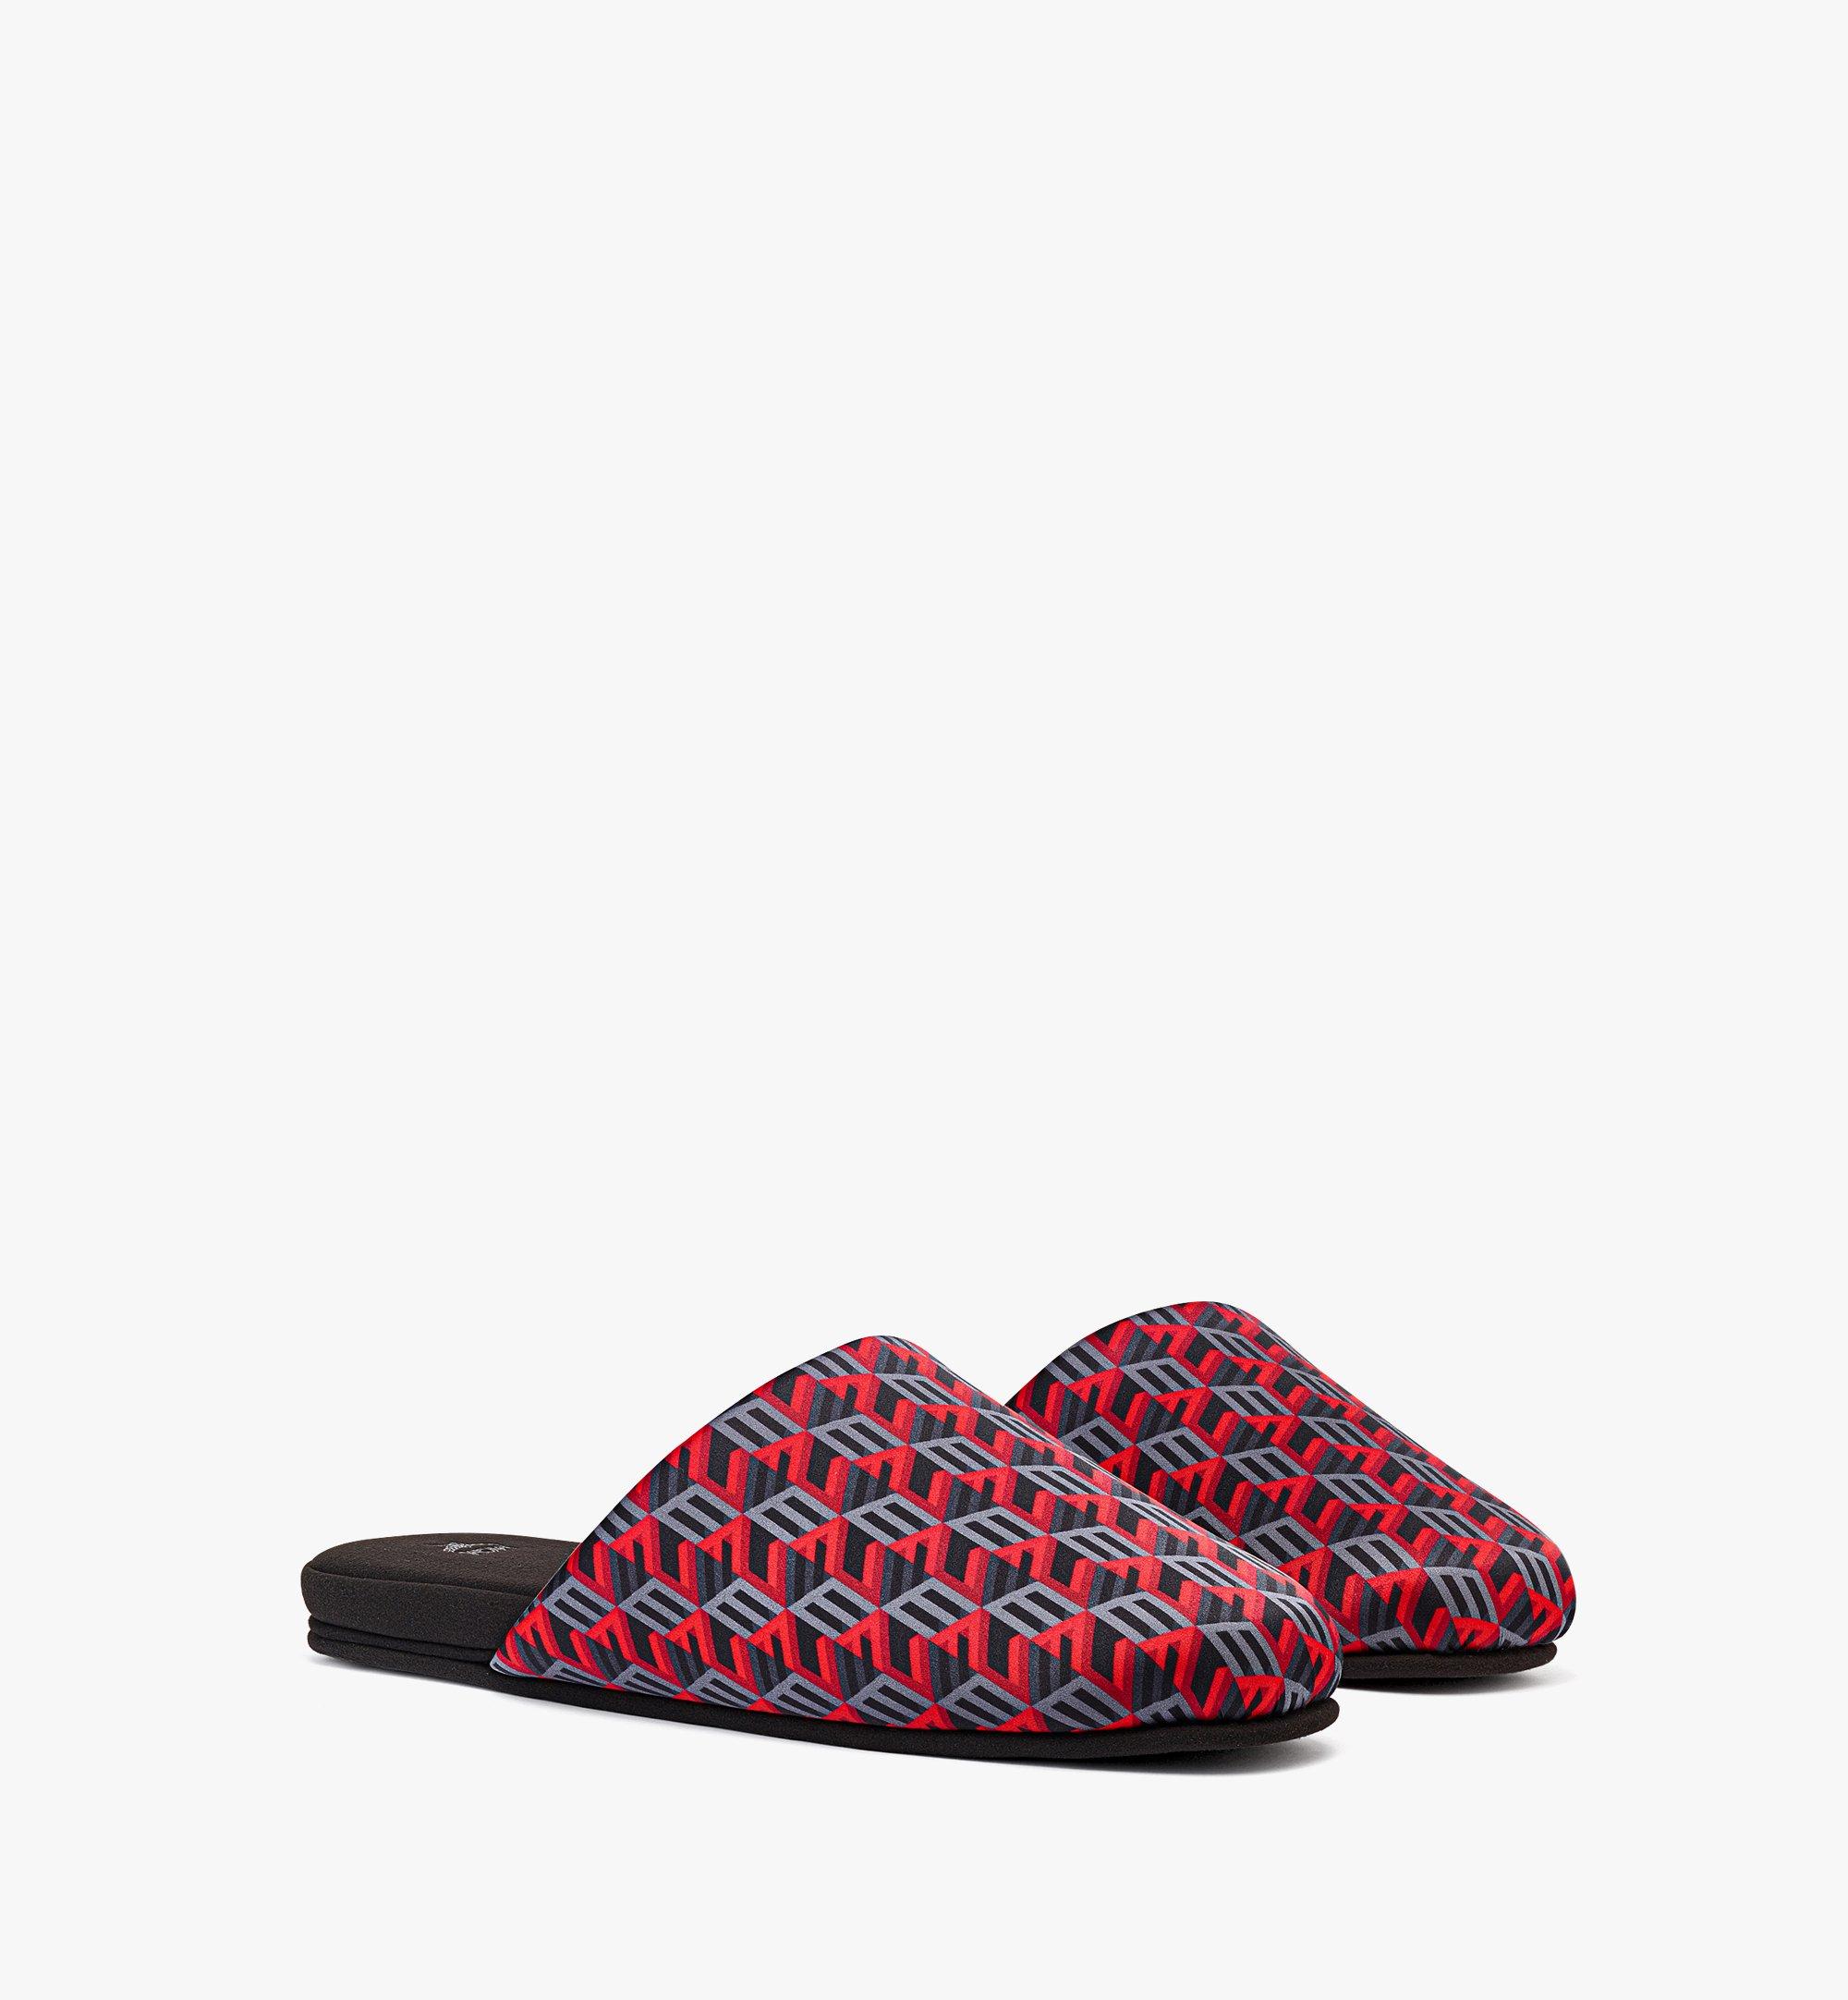 MCM House Slippers in Holiday Cubic Monogram Jacquard Red MEXCSCK11R000S Alternate View 1